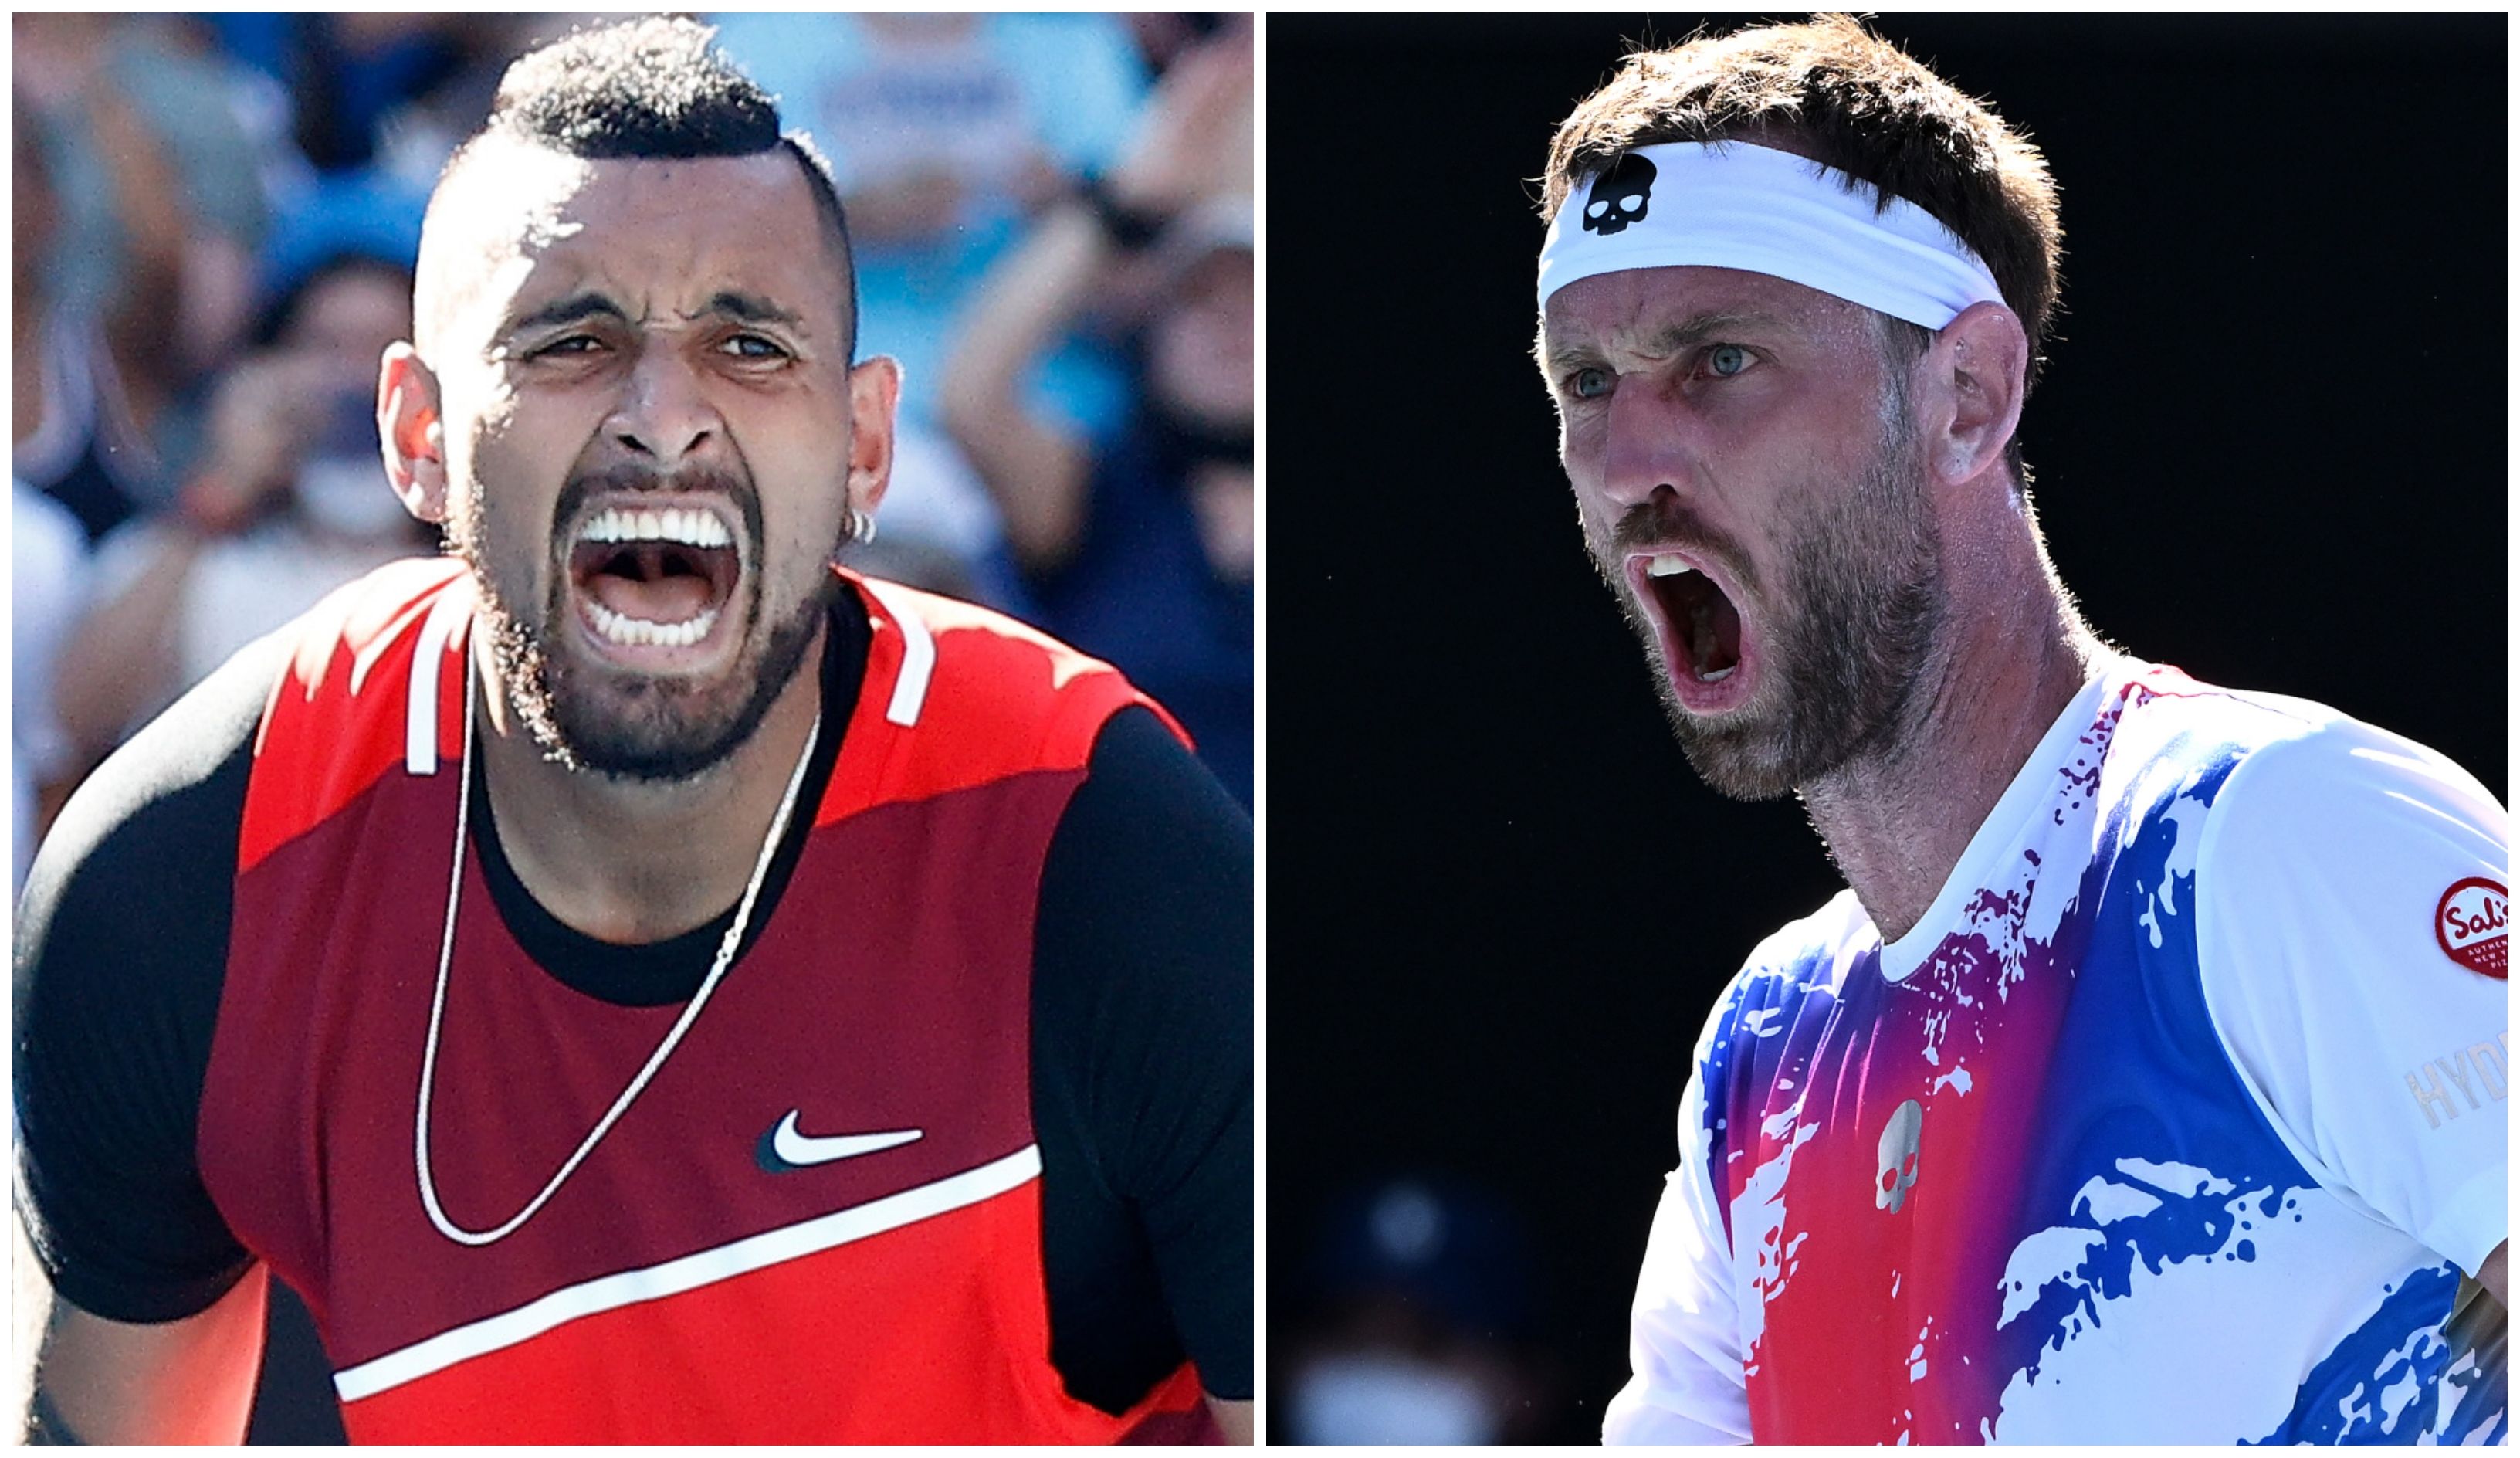 Furious Kiwi doubles star hammers Nick Kyrgios for his behaviour in their quarter-final match-up